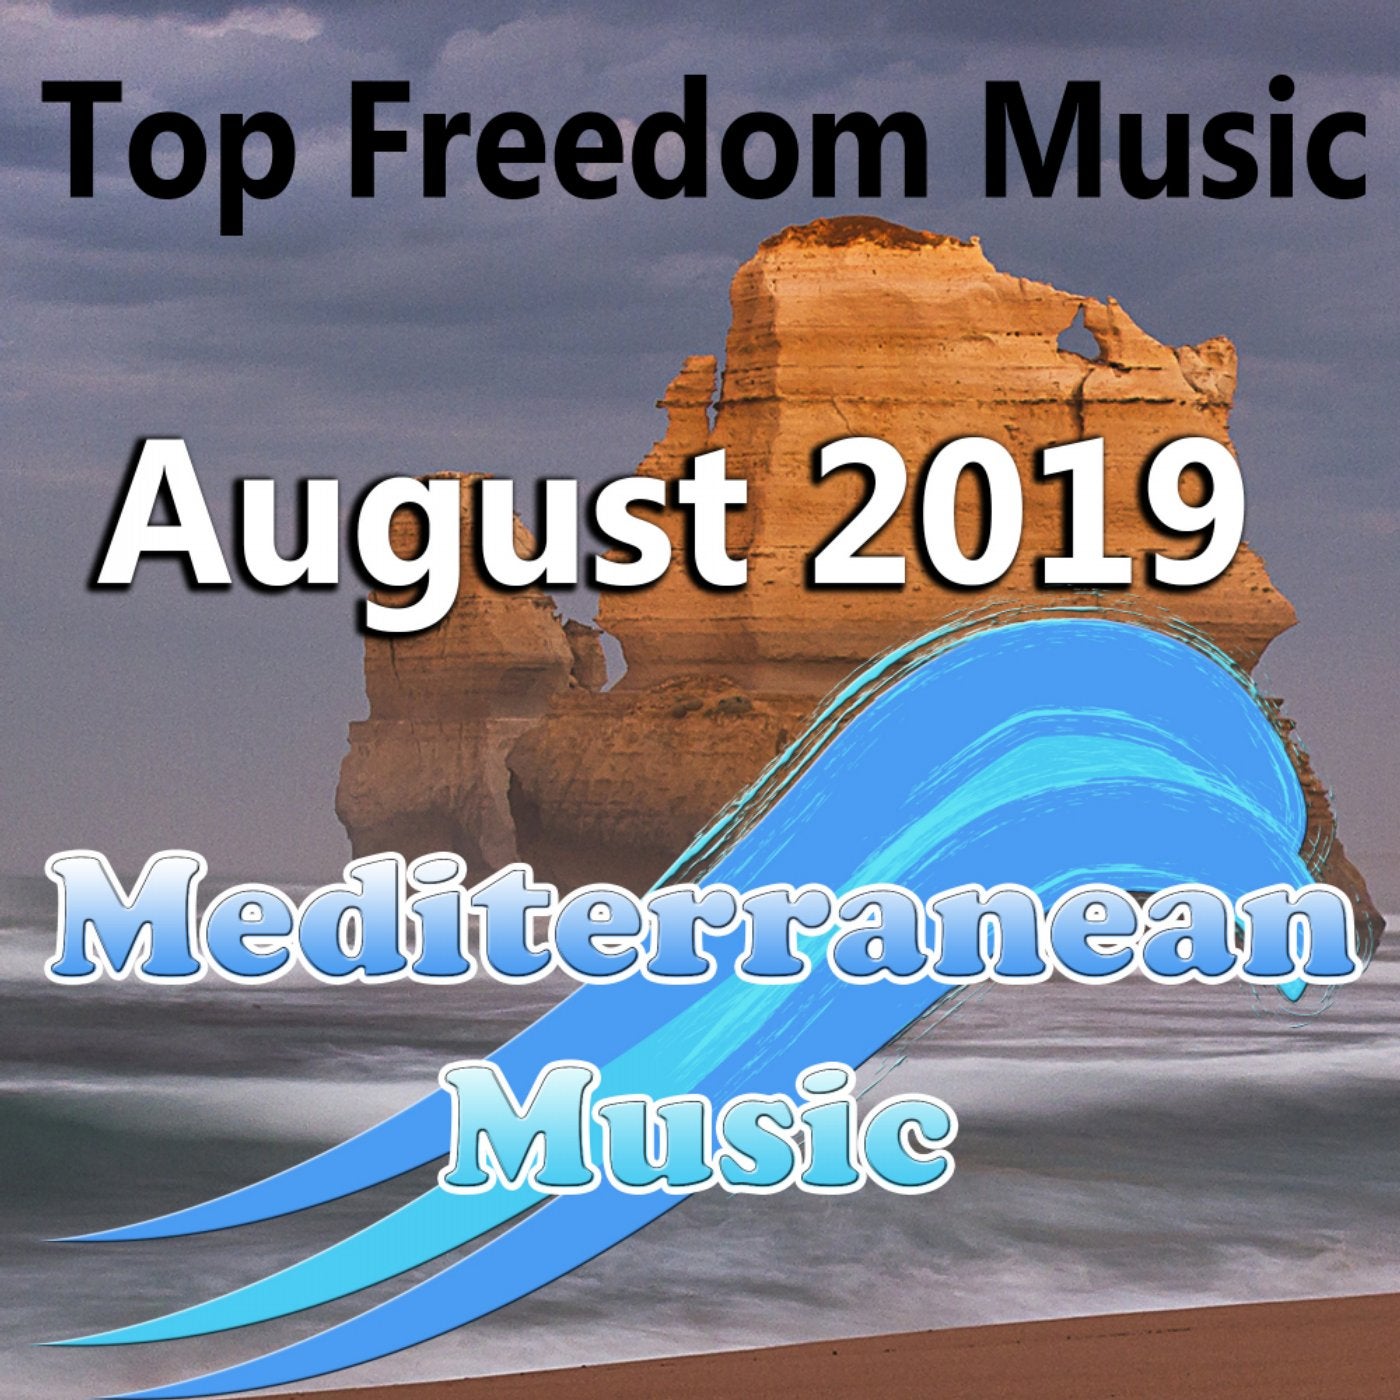 Top Freedom Music August 2019